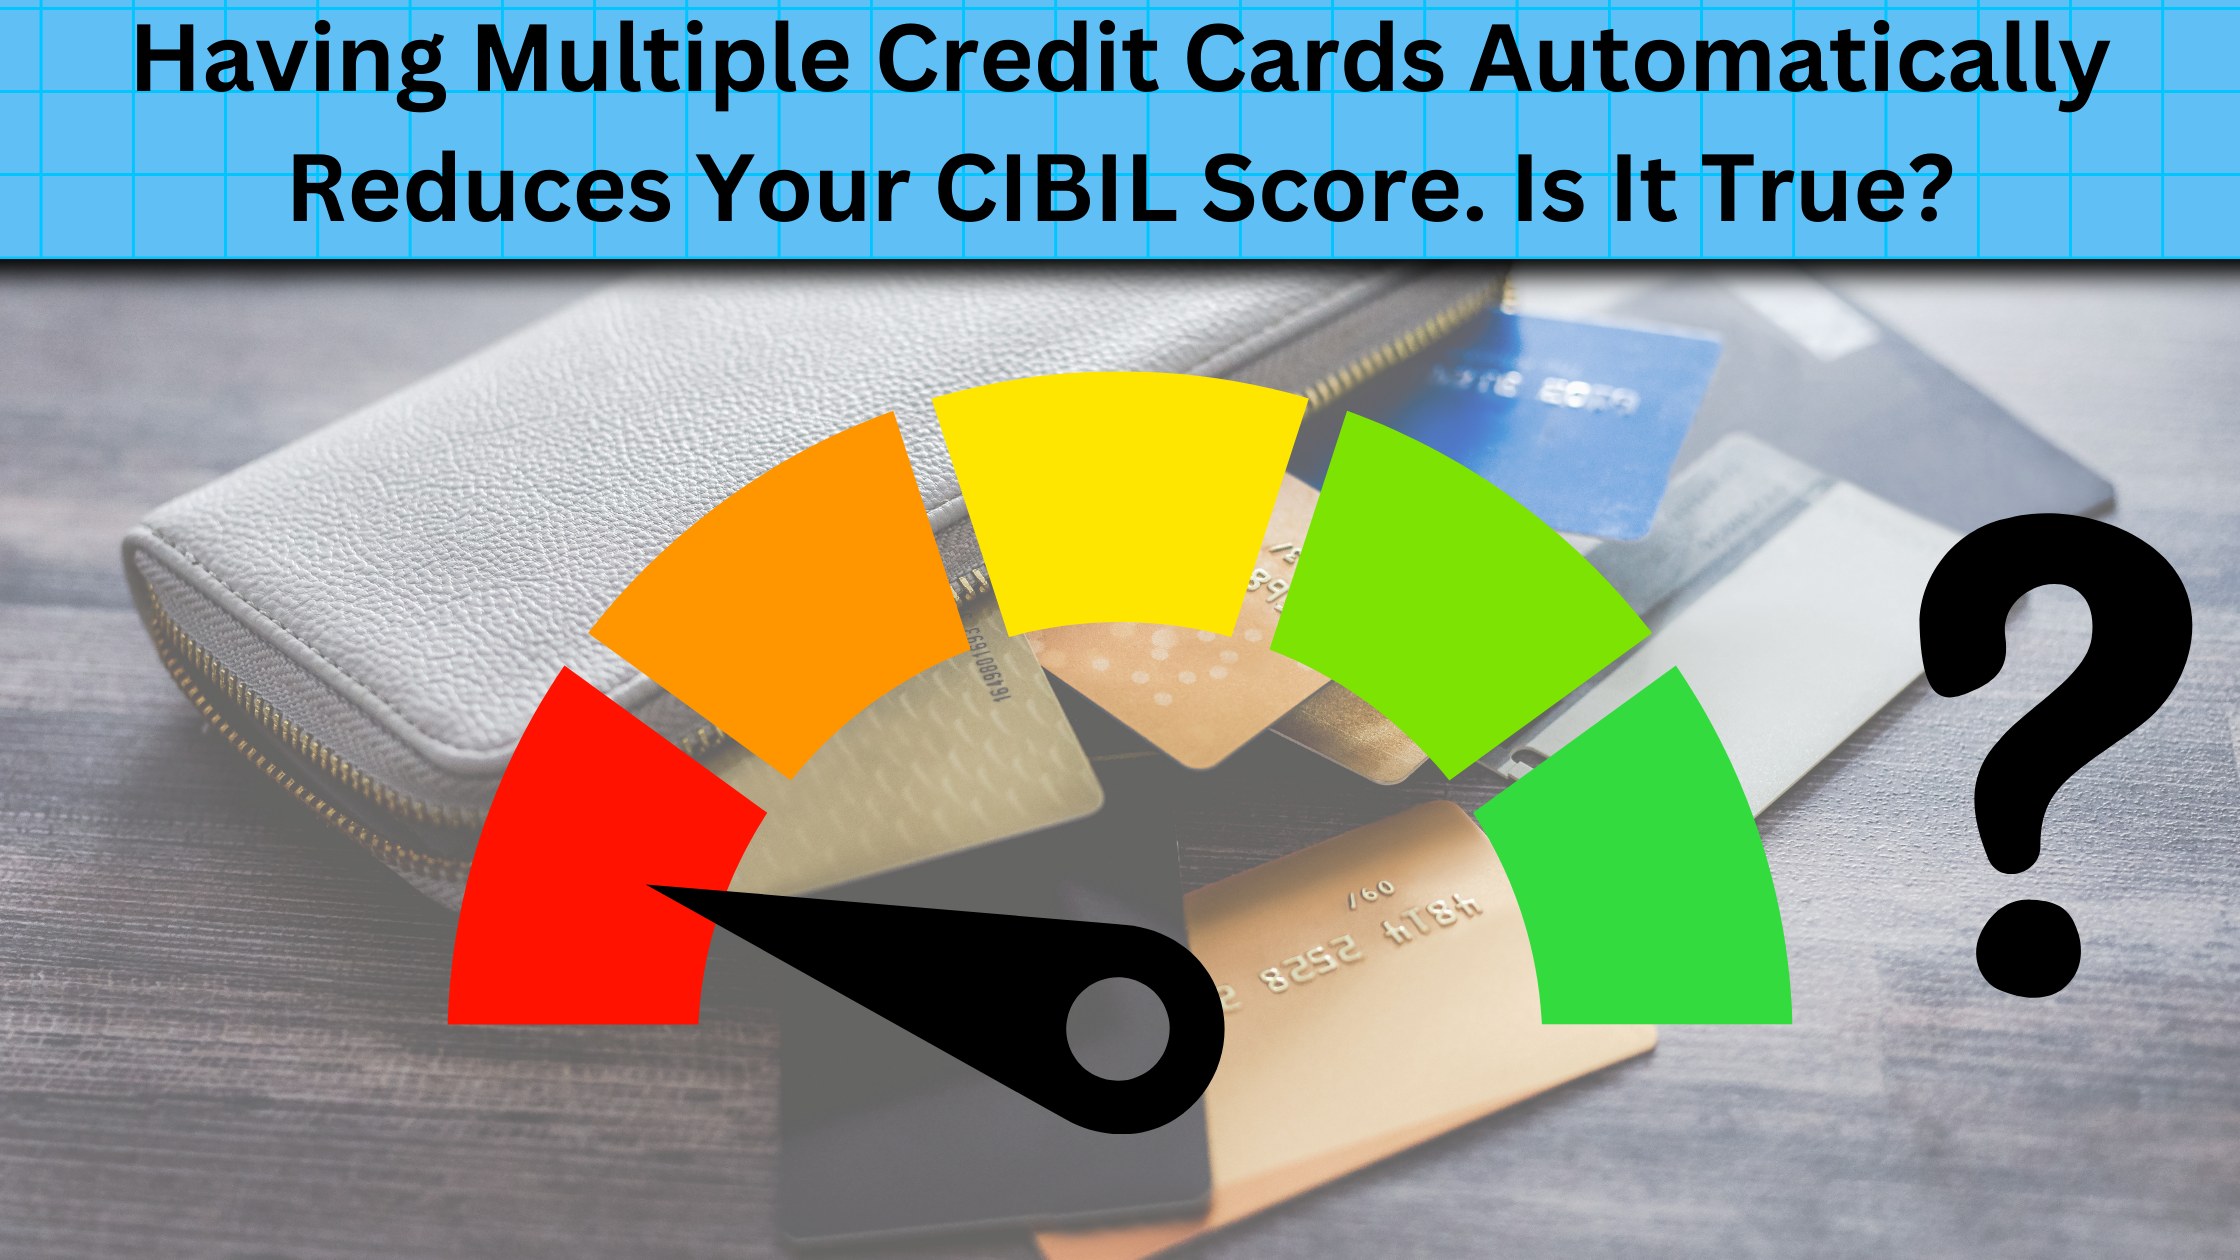 Having Multiple Credit Cards Automatically Reduces Your CIBIL Score.Is It True?